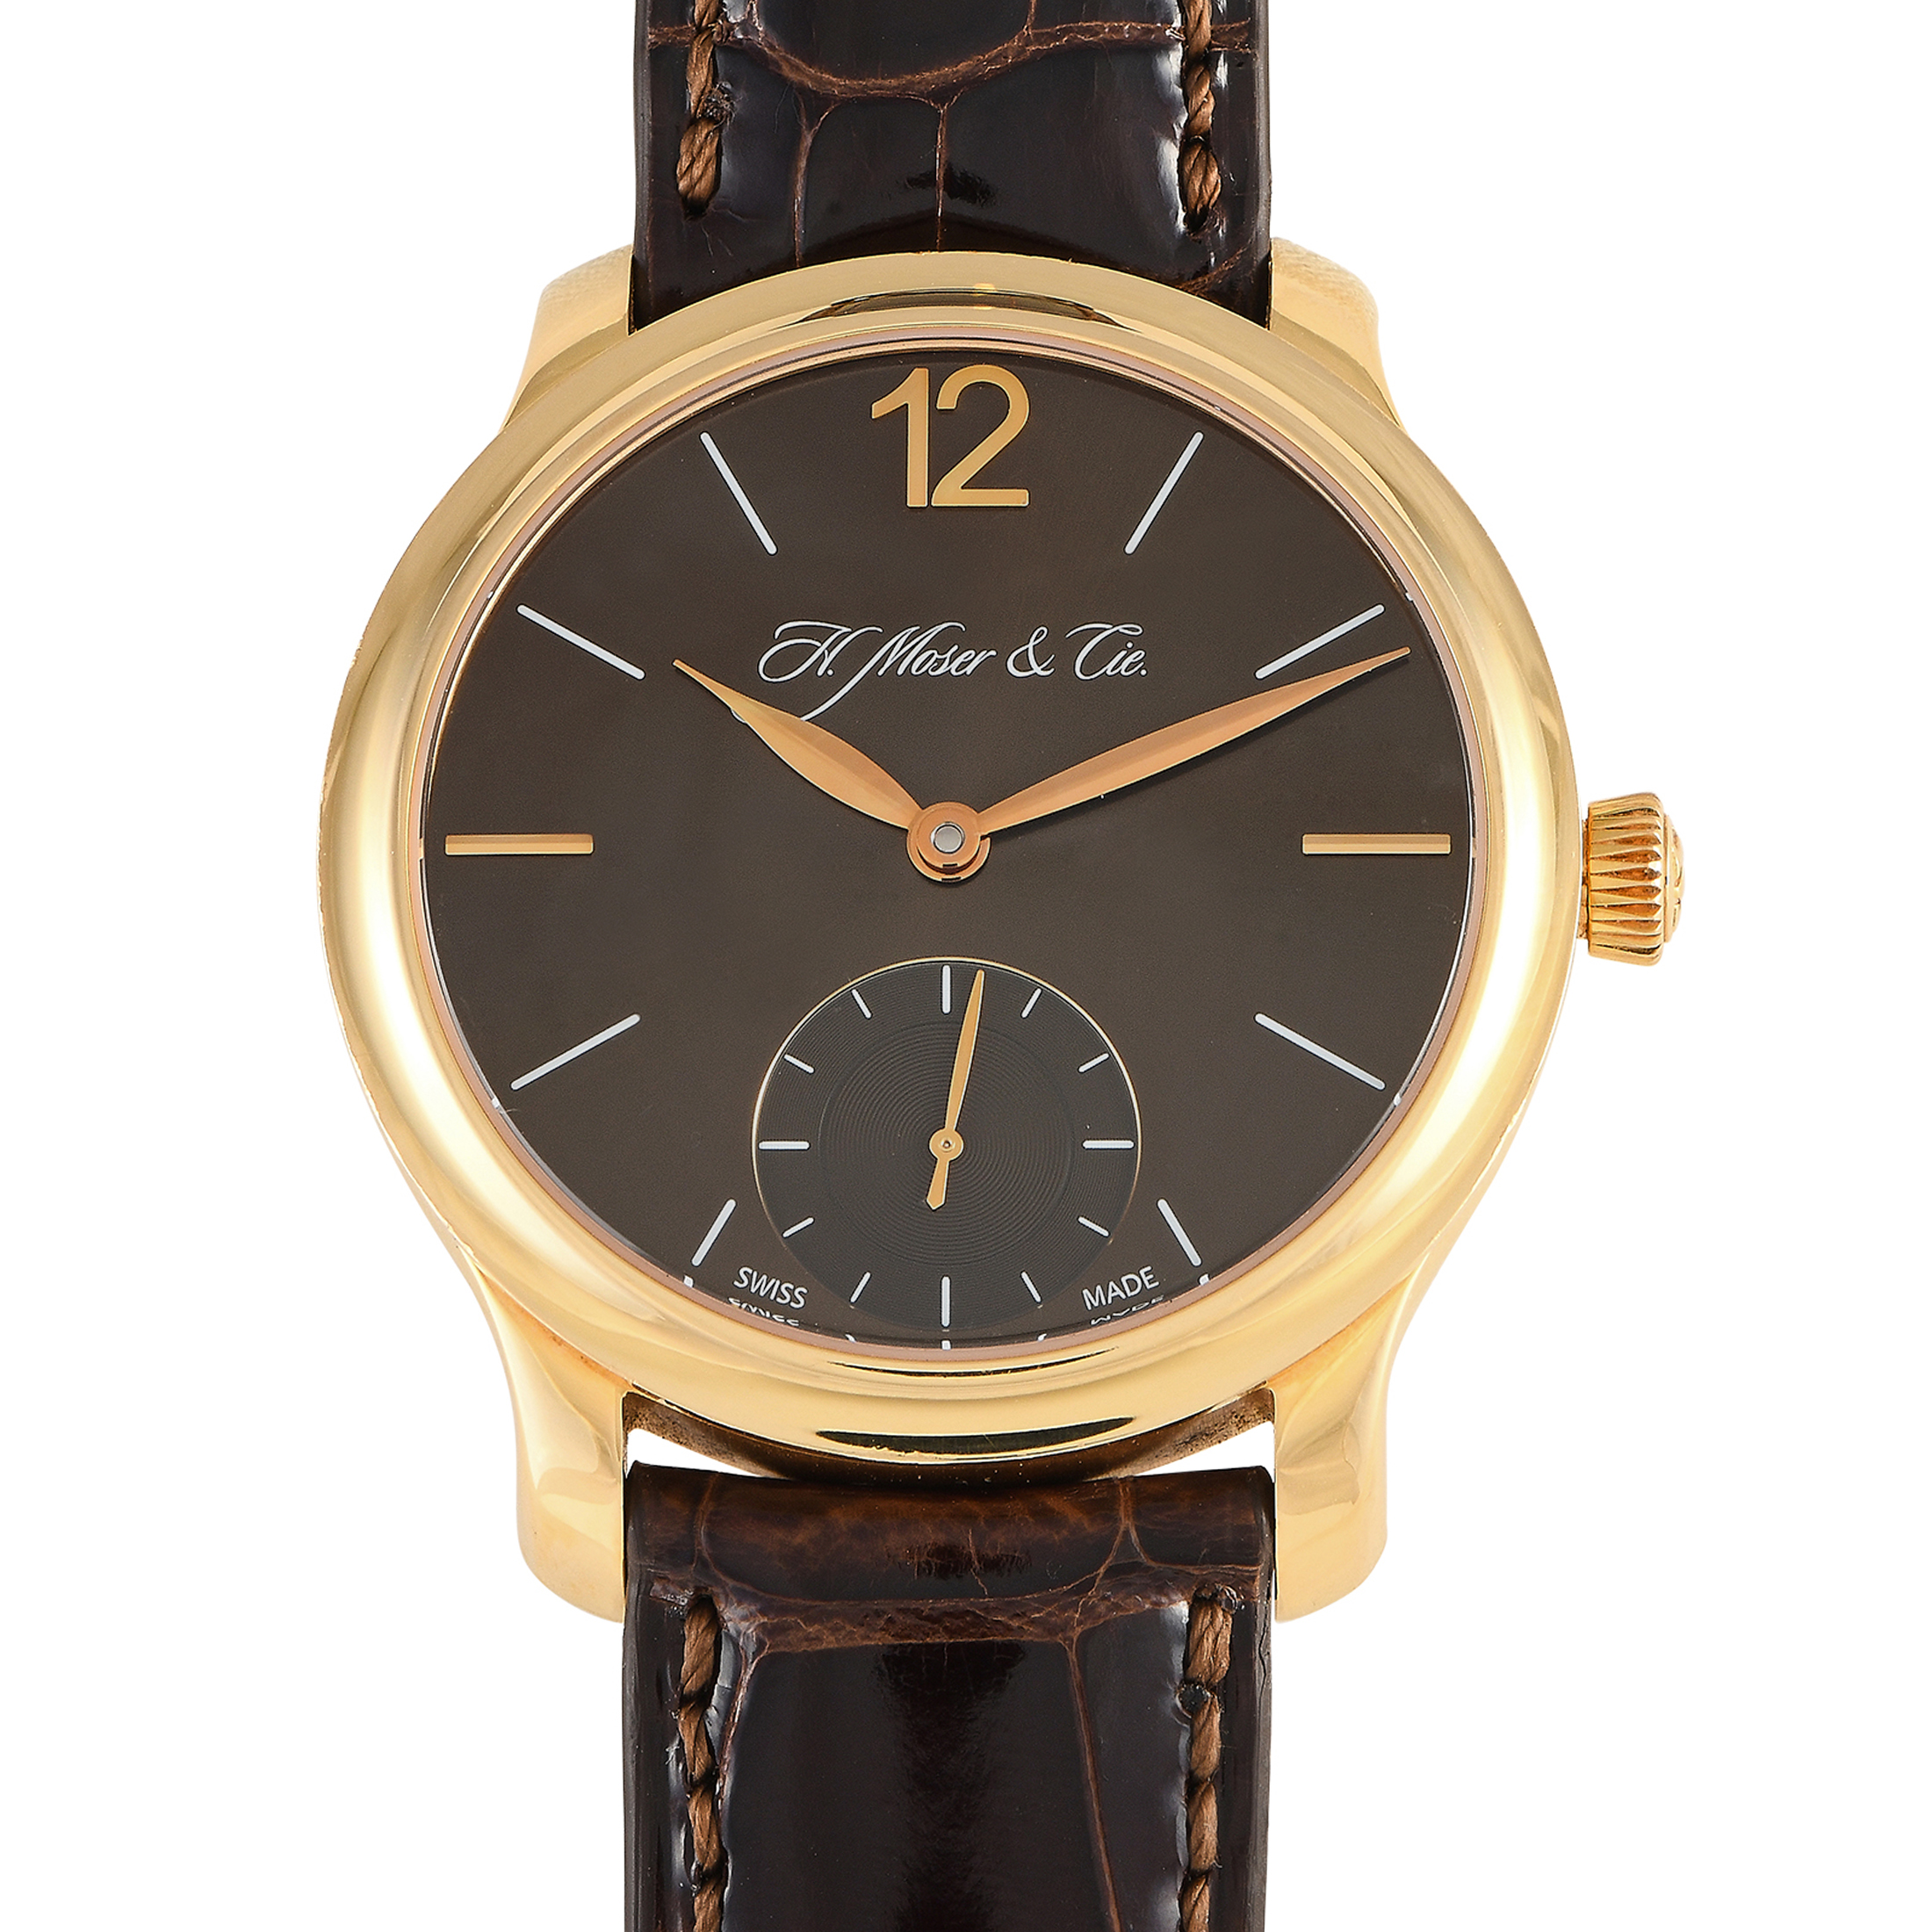 Is The H. Moser & Cie Perpetual Calendar One Of The Original Smartwatches?  Their Video Suggests So | aBlogtoWatch